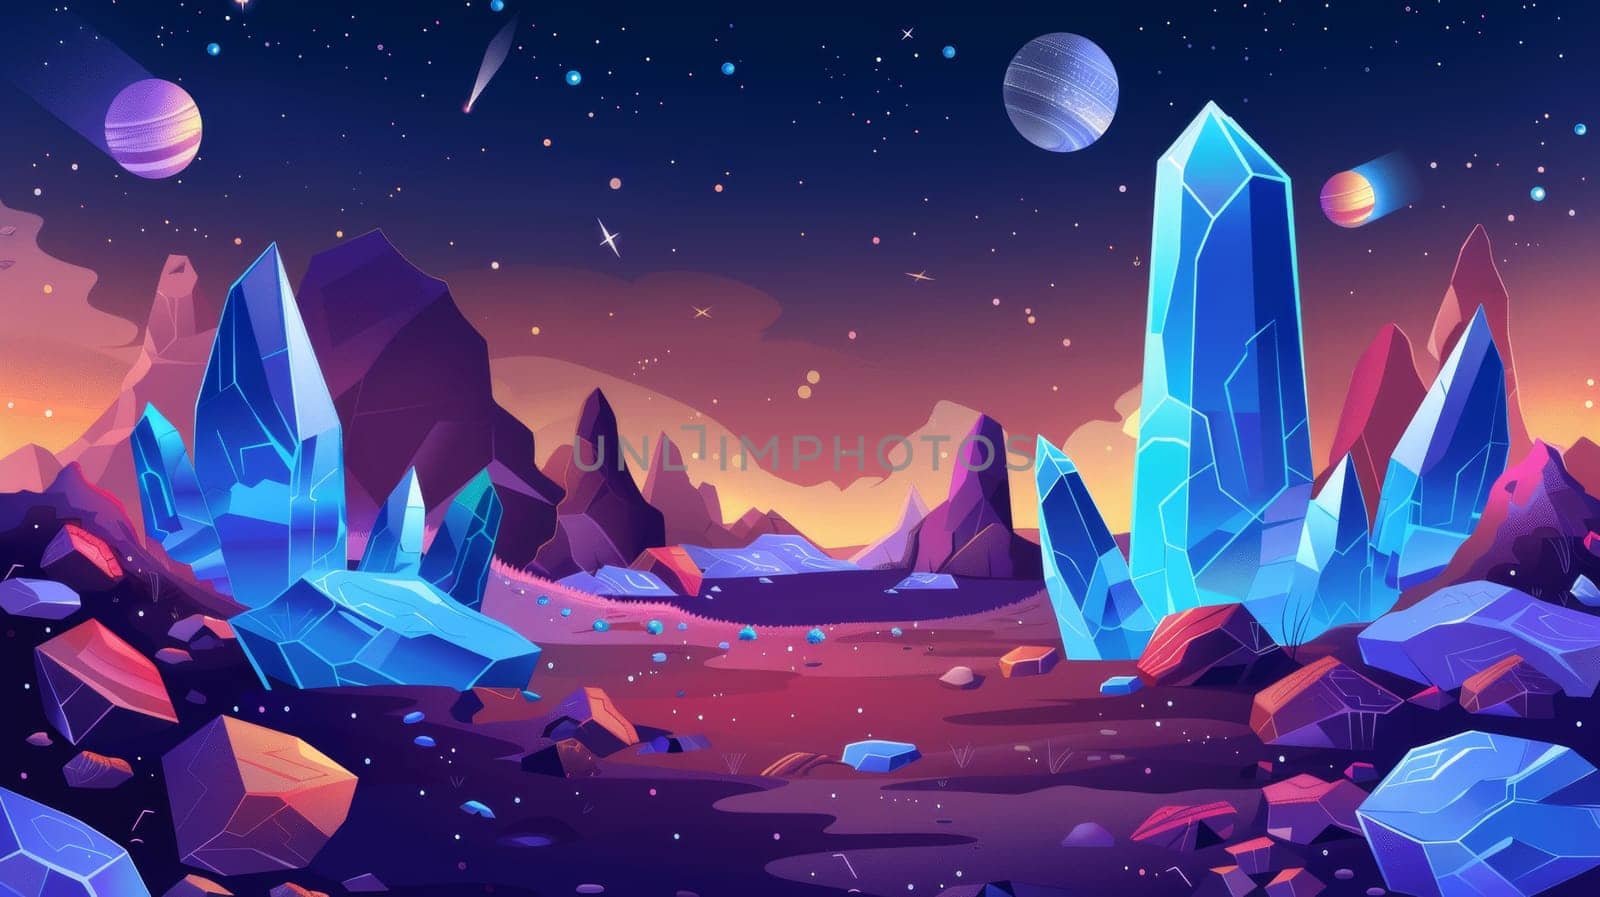 Space game background featuring alien planet landscape with rocks, shiney blue crystals, satellites, and stars in night sky.